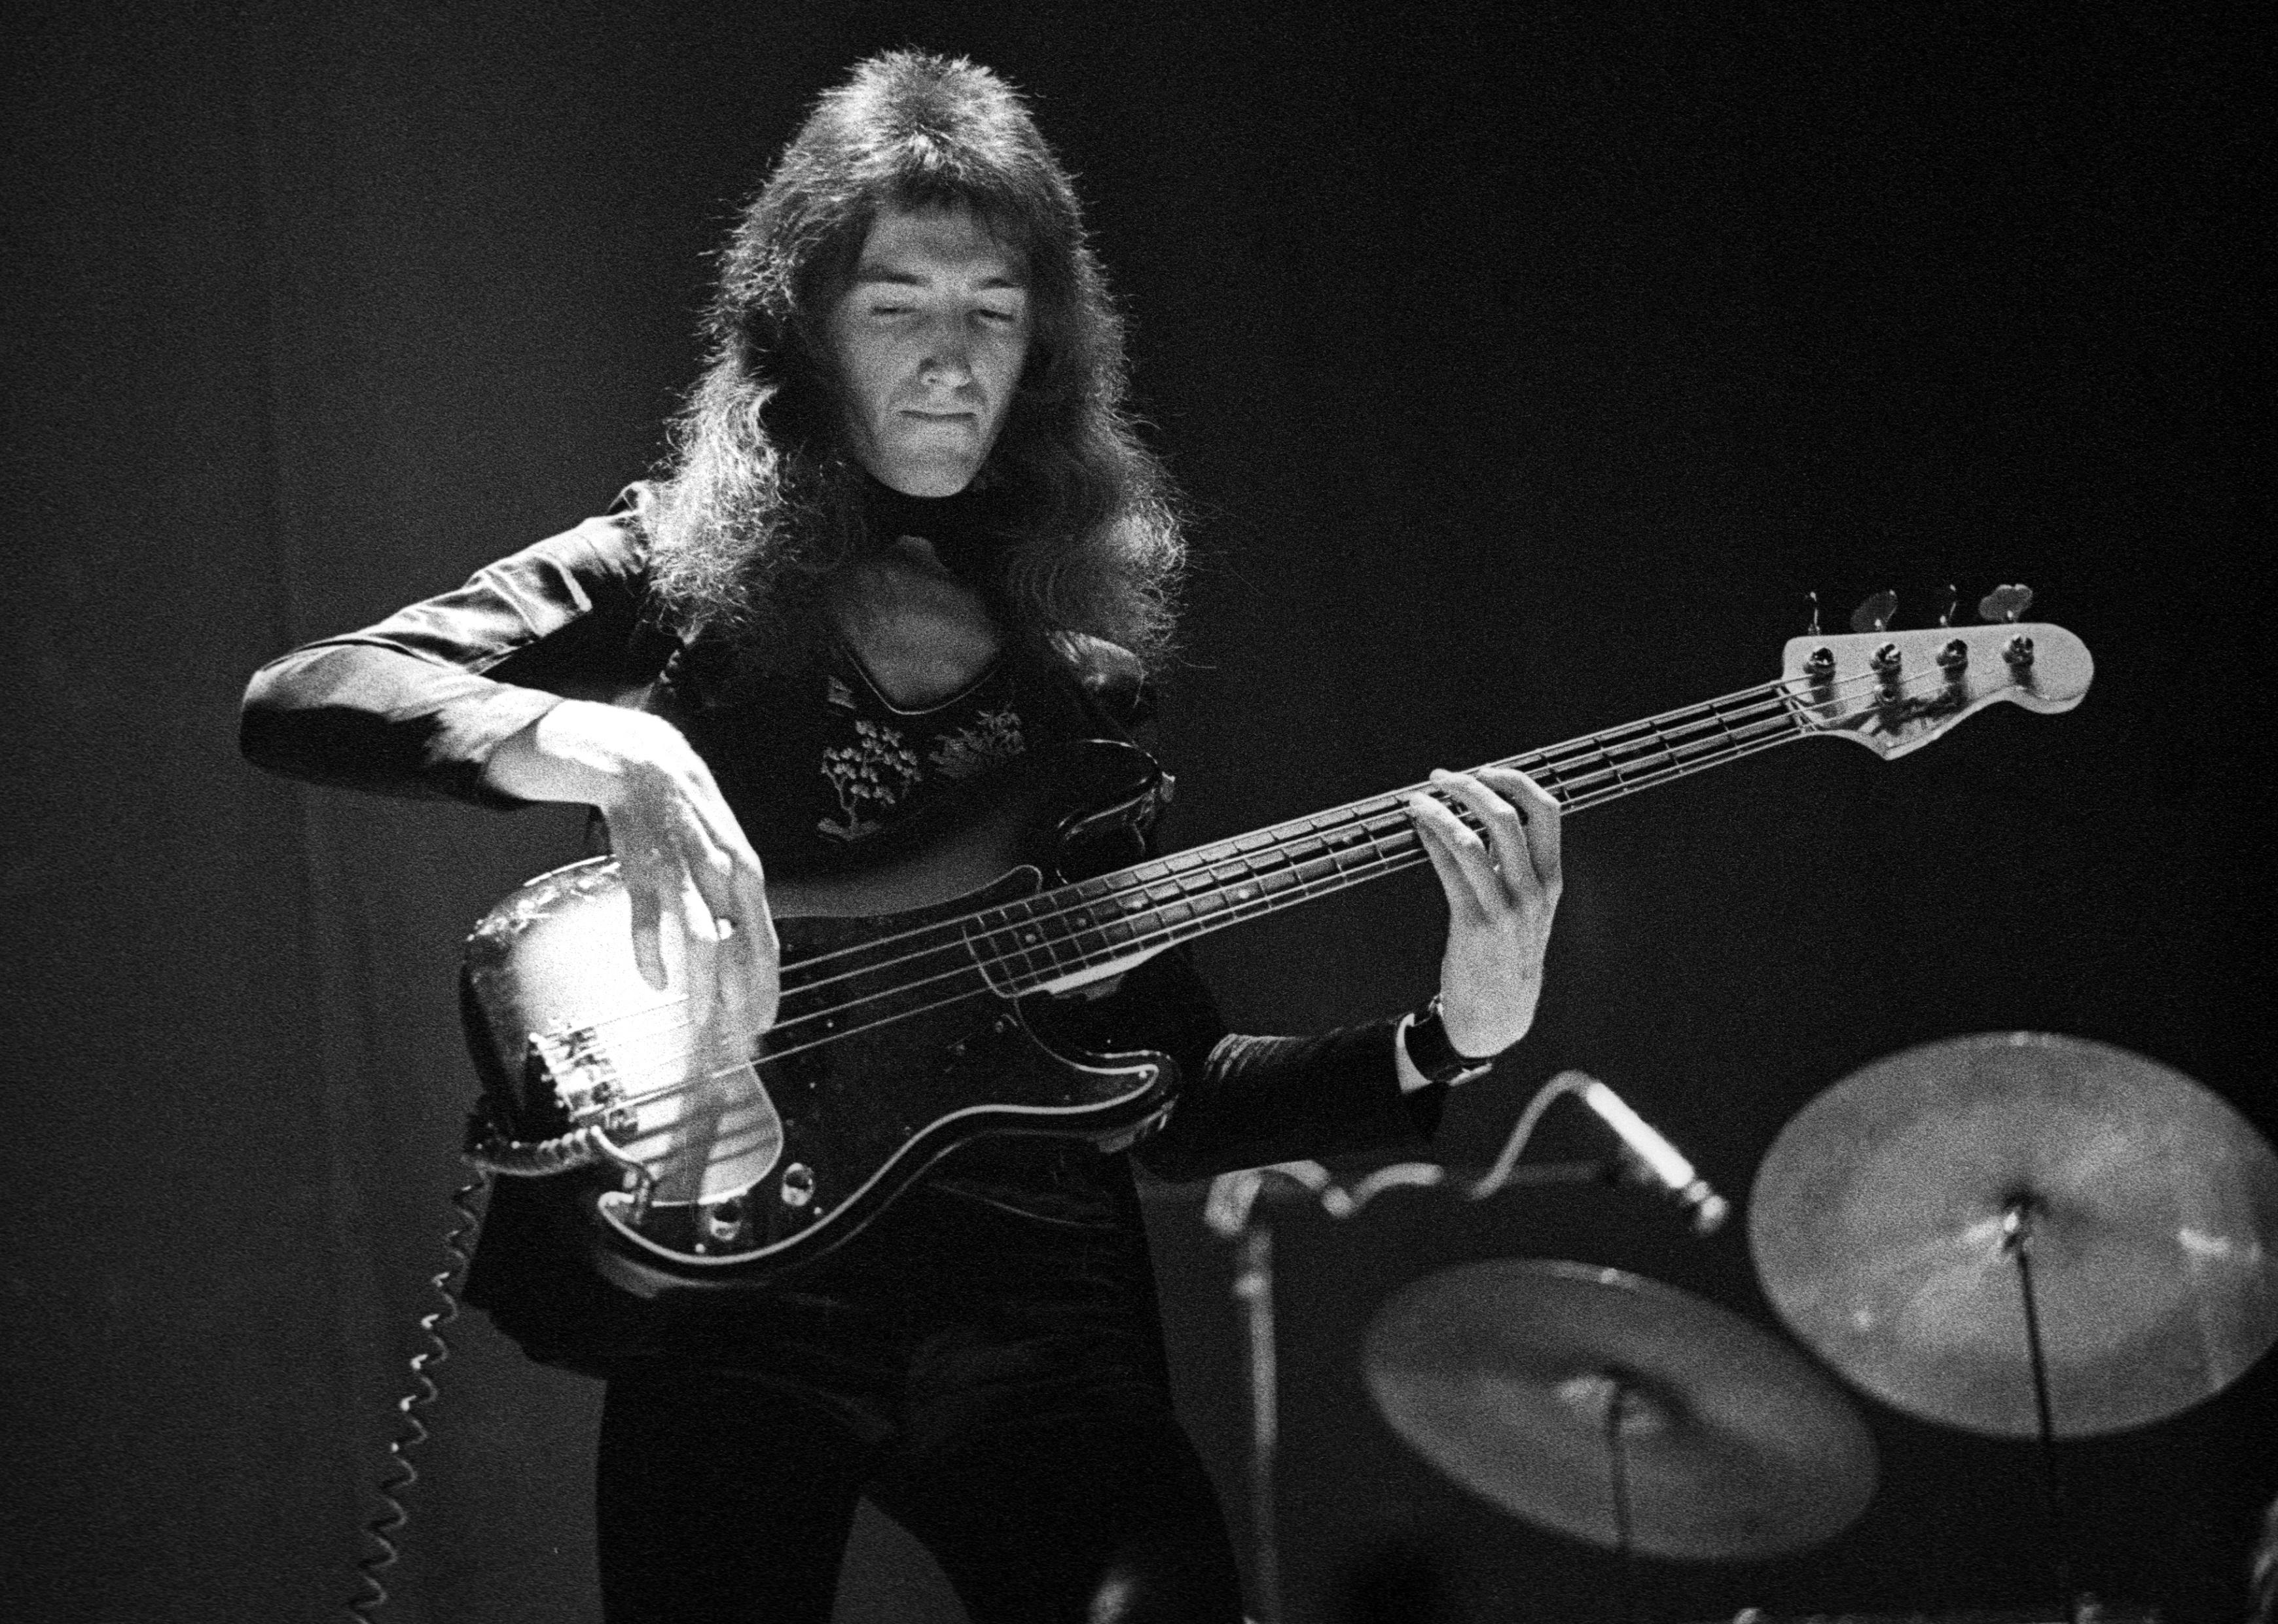 John Deacon of Queen performs on stage at the Rainbow Theatre in London.